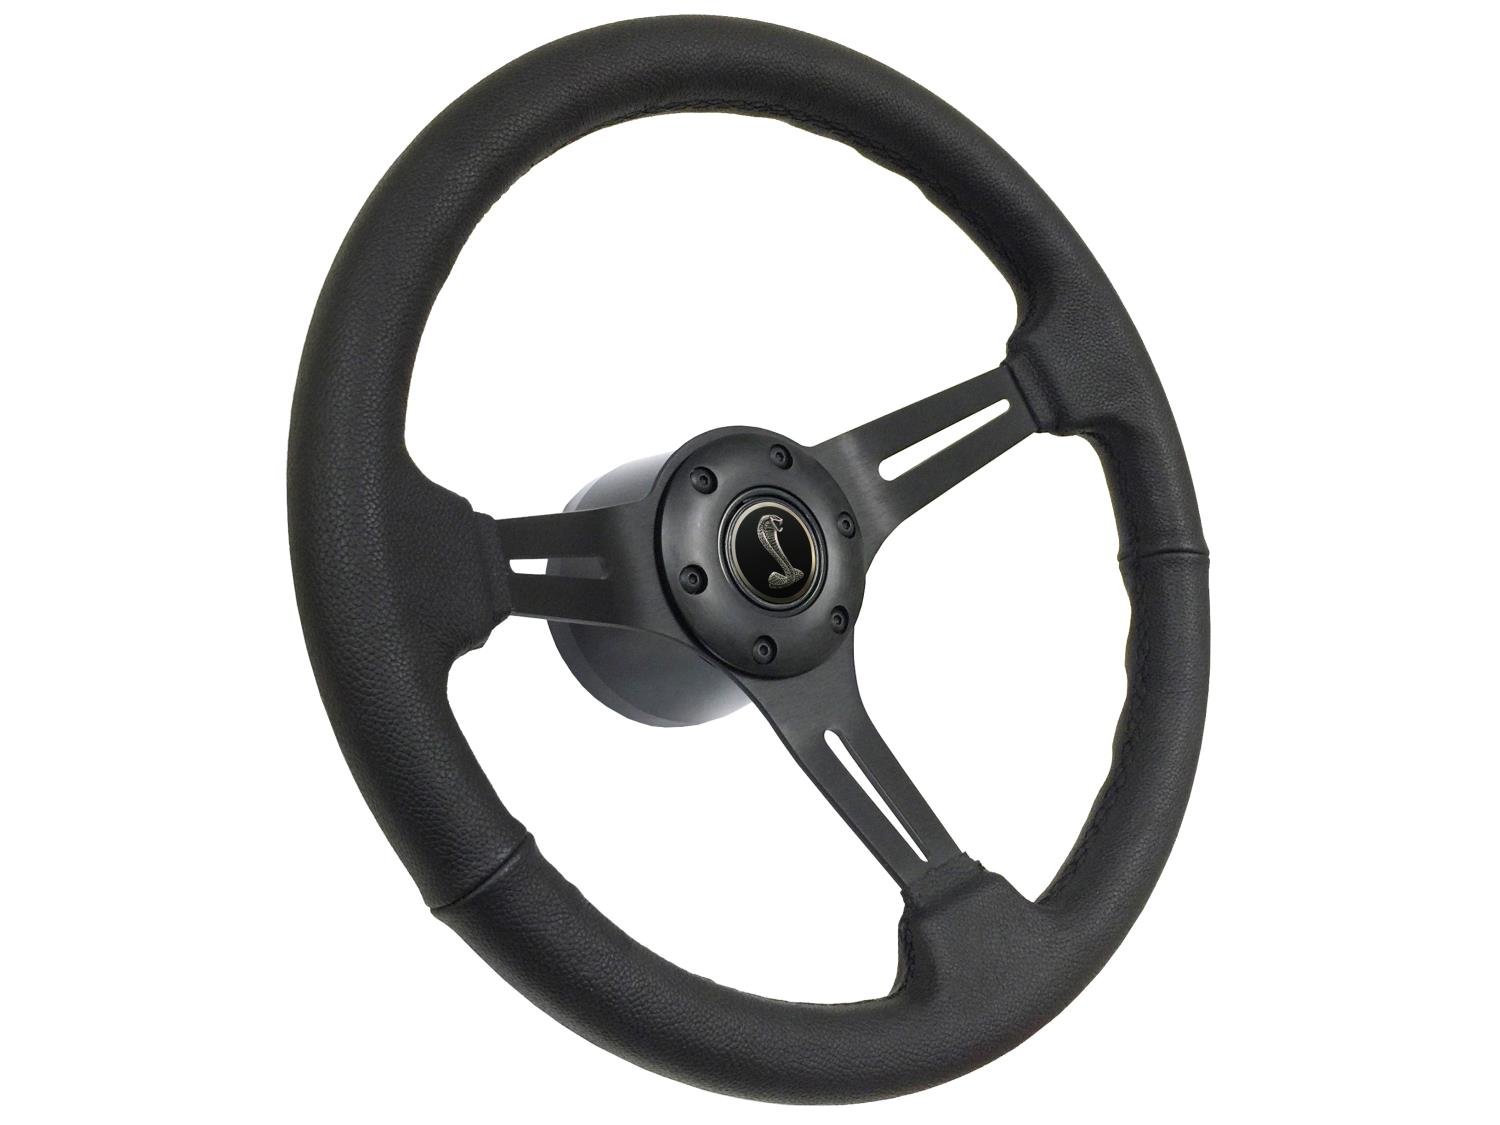 S6 Sport Steering Wheel Kit for 1979-1982 Ford Mustang, 14 in. Diameter, Black Leather Grip, with 6-Bolt Adapter and Horn Button